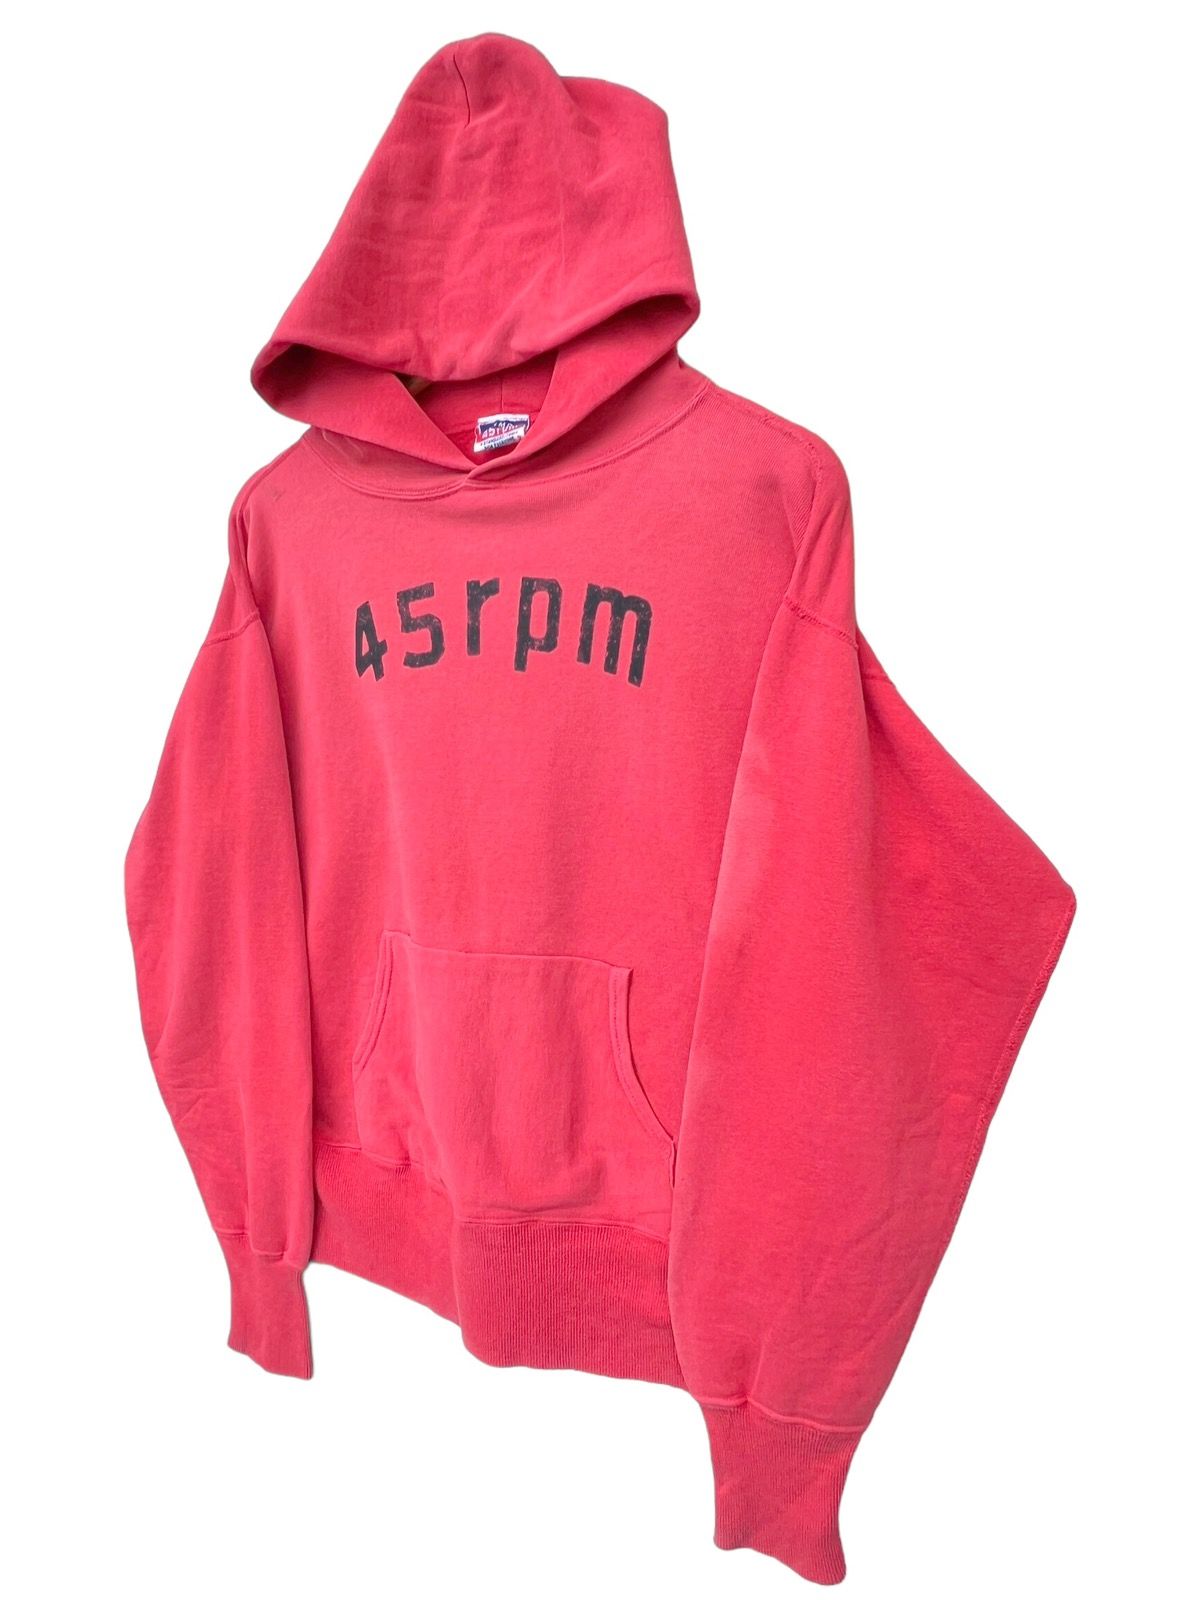 Vintage 45RPM Red Sun Faded Distressed Baggy Boxy Hoodie - 2